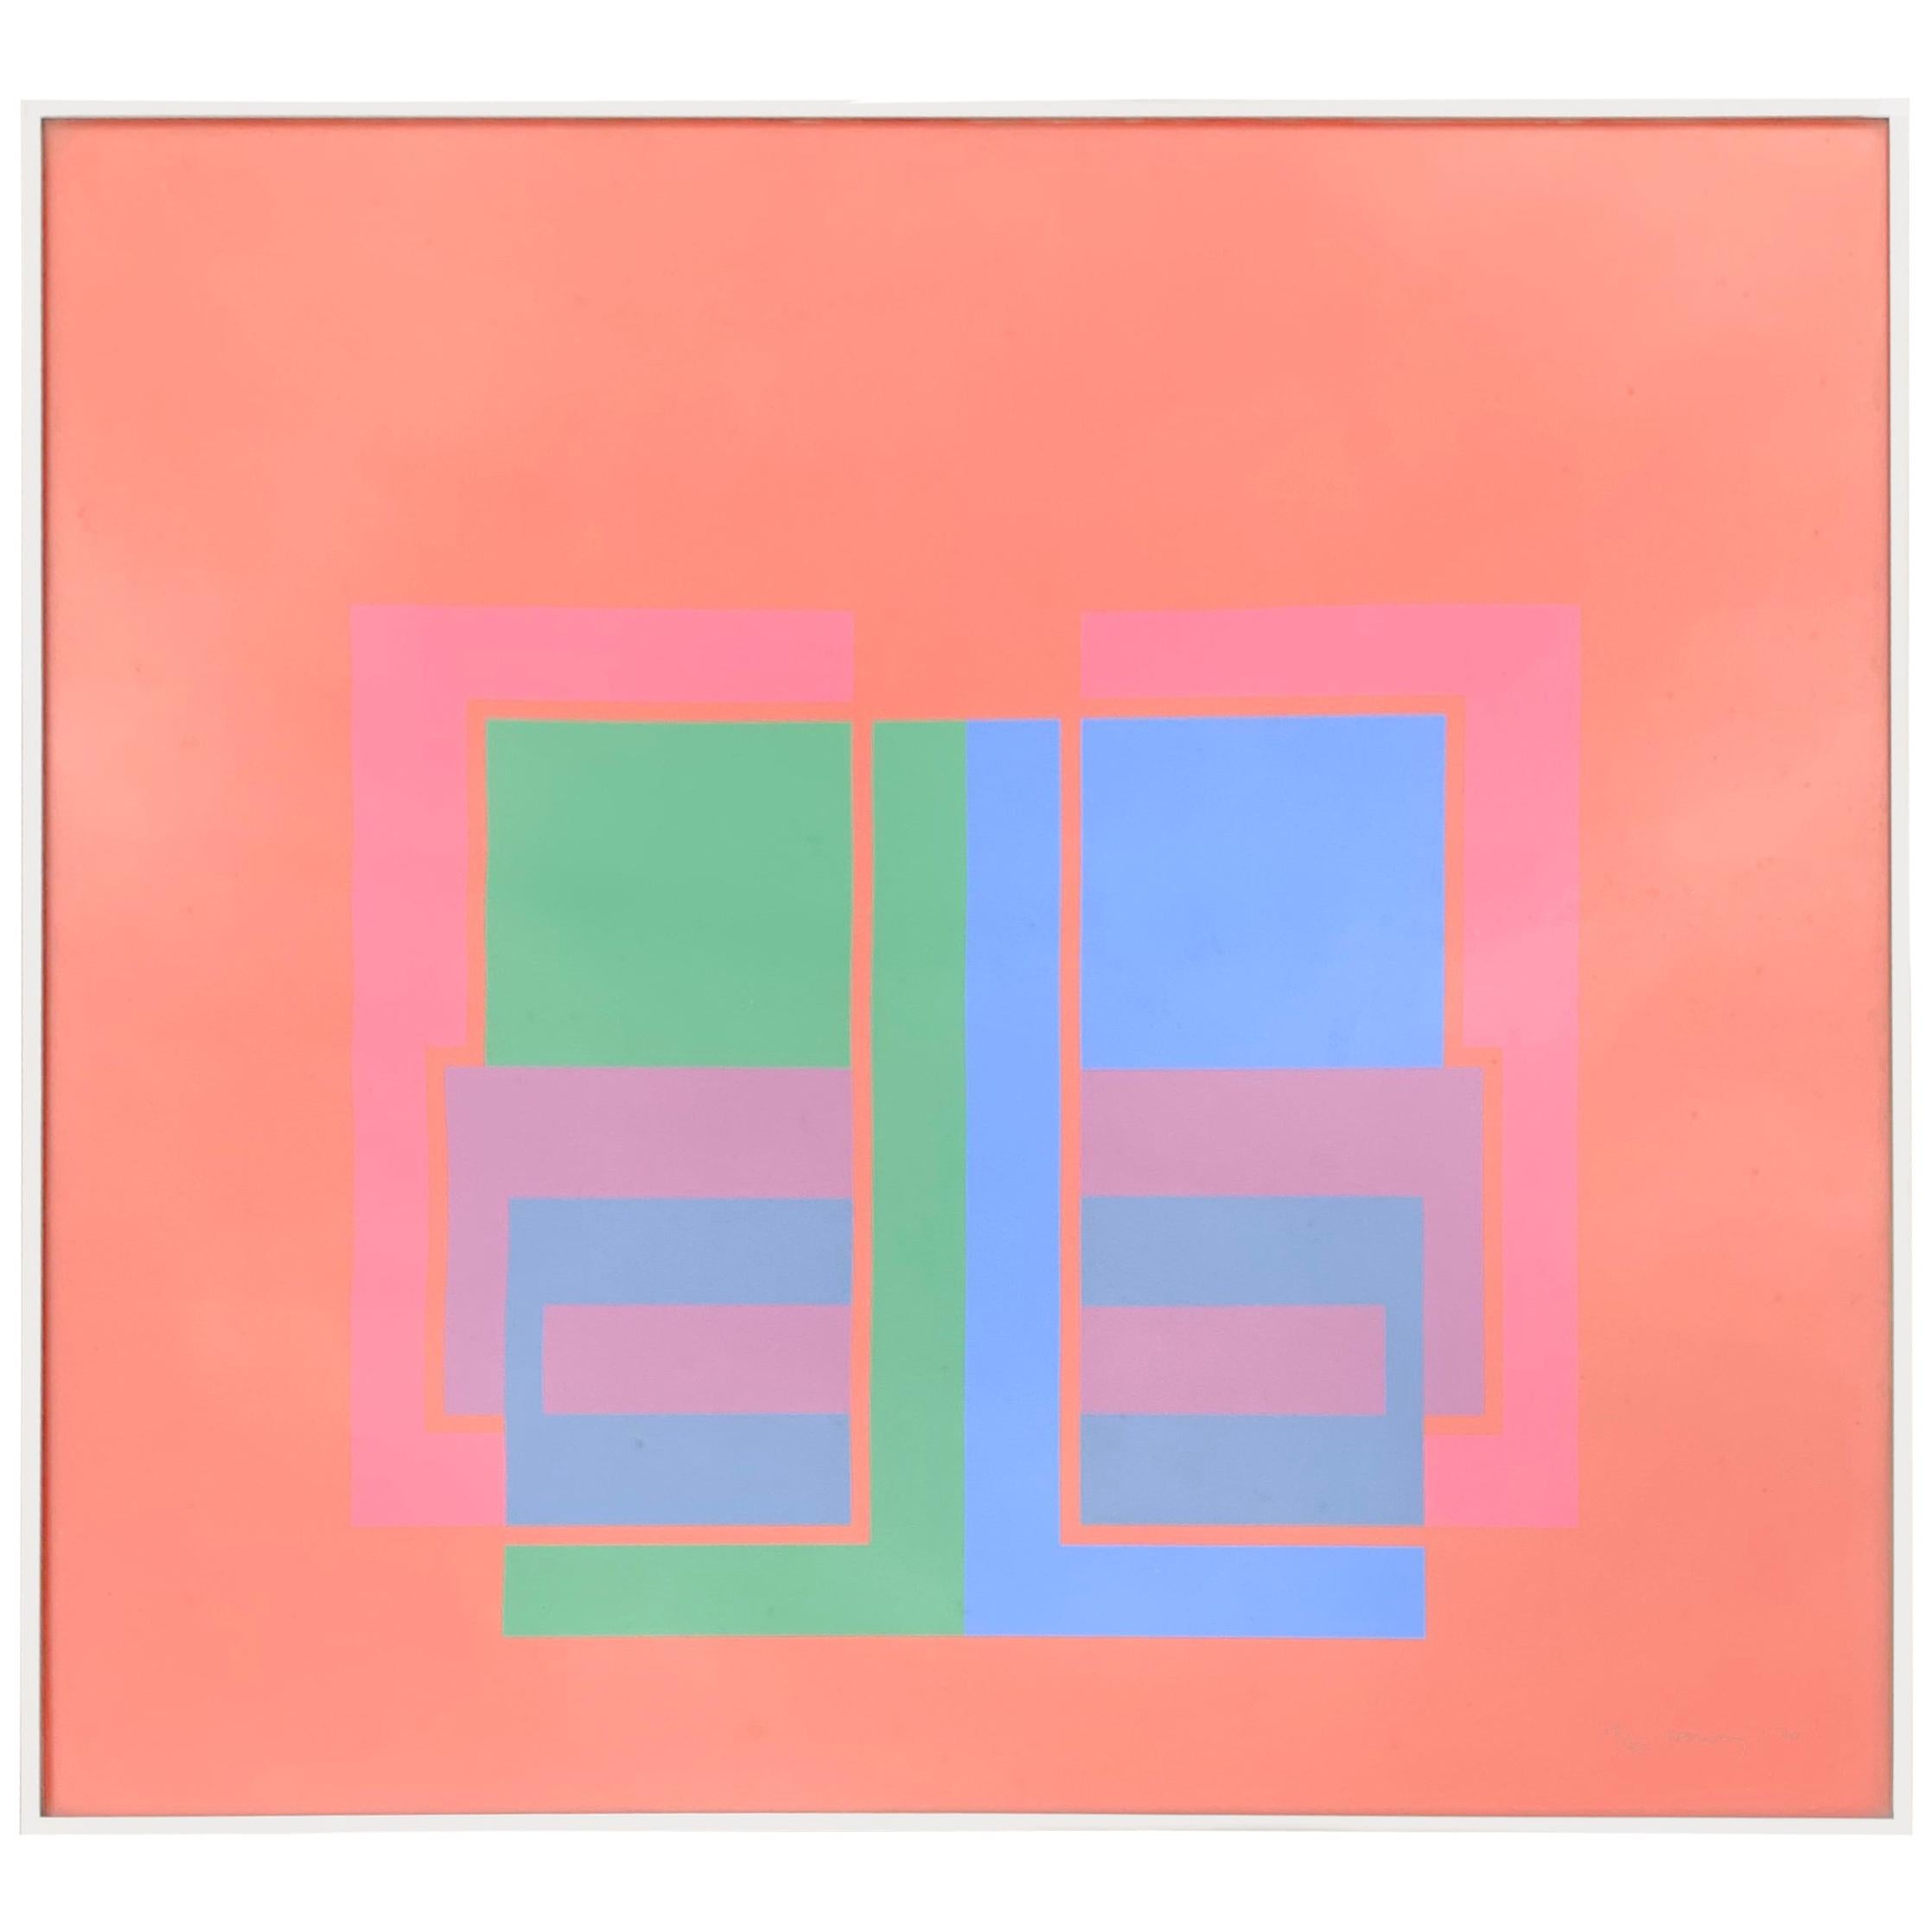 "Denny", Red, Blue and Green Cubes, by Eduard Maurice Fitzgerald 1970